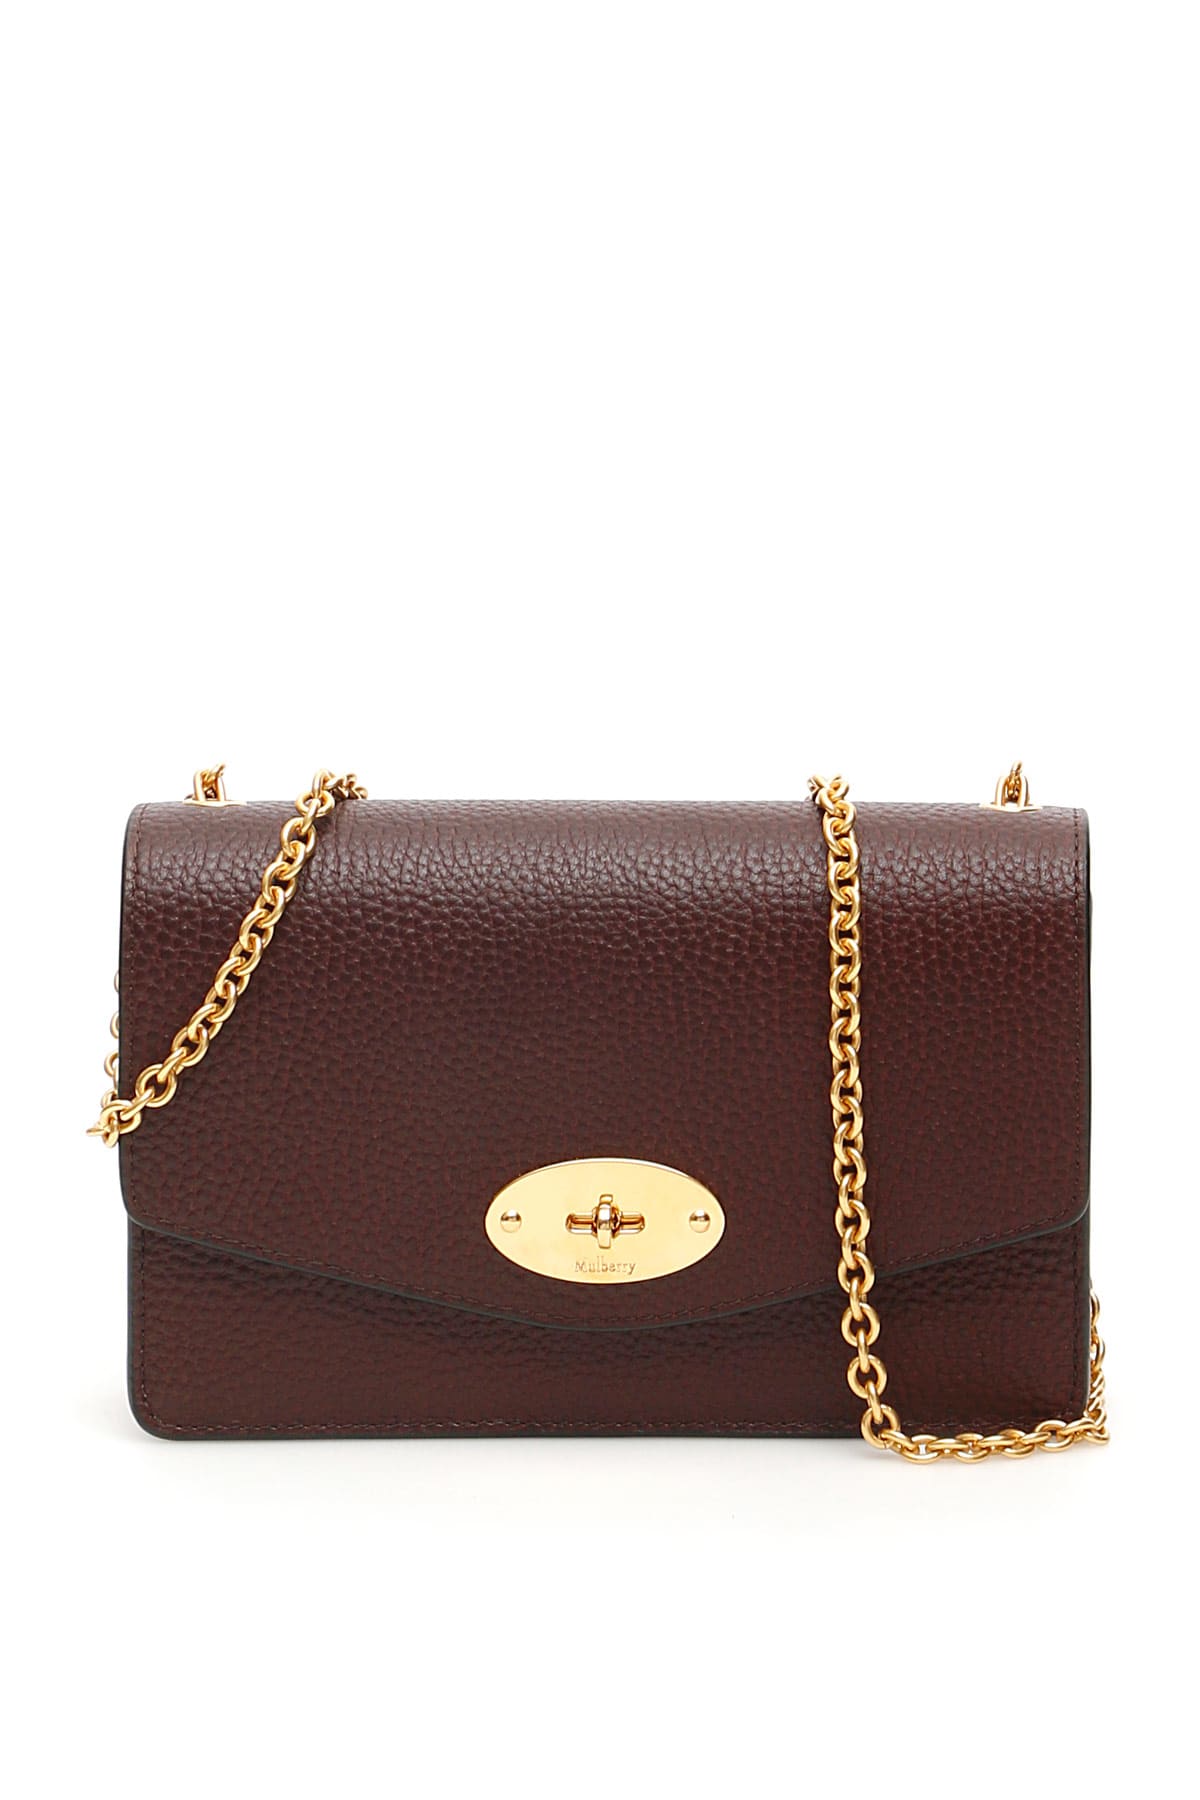 MULBERRY GRAIN LEATHER SMALL DARLEY BAG,11205669